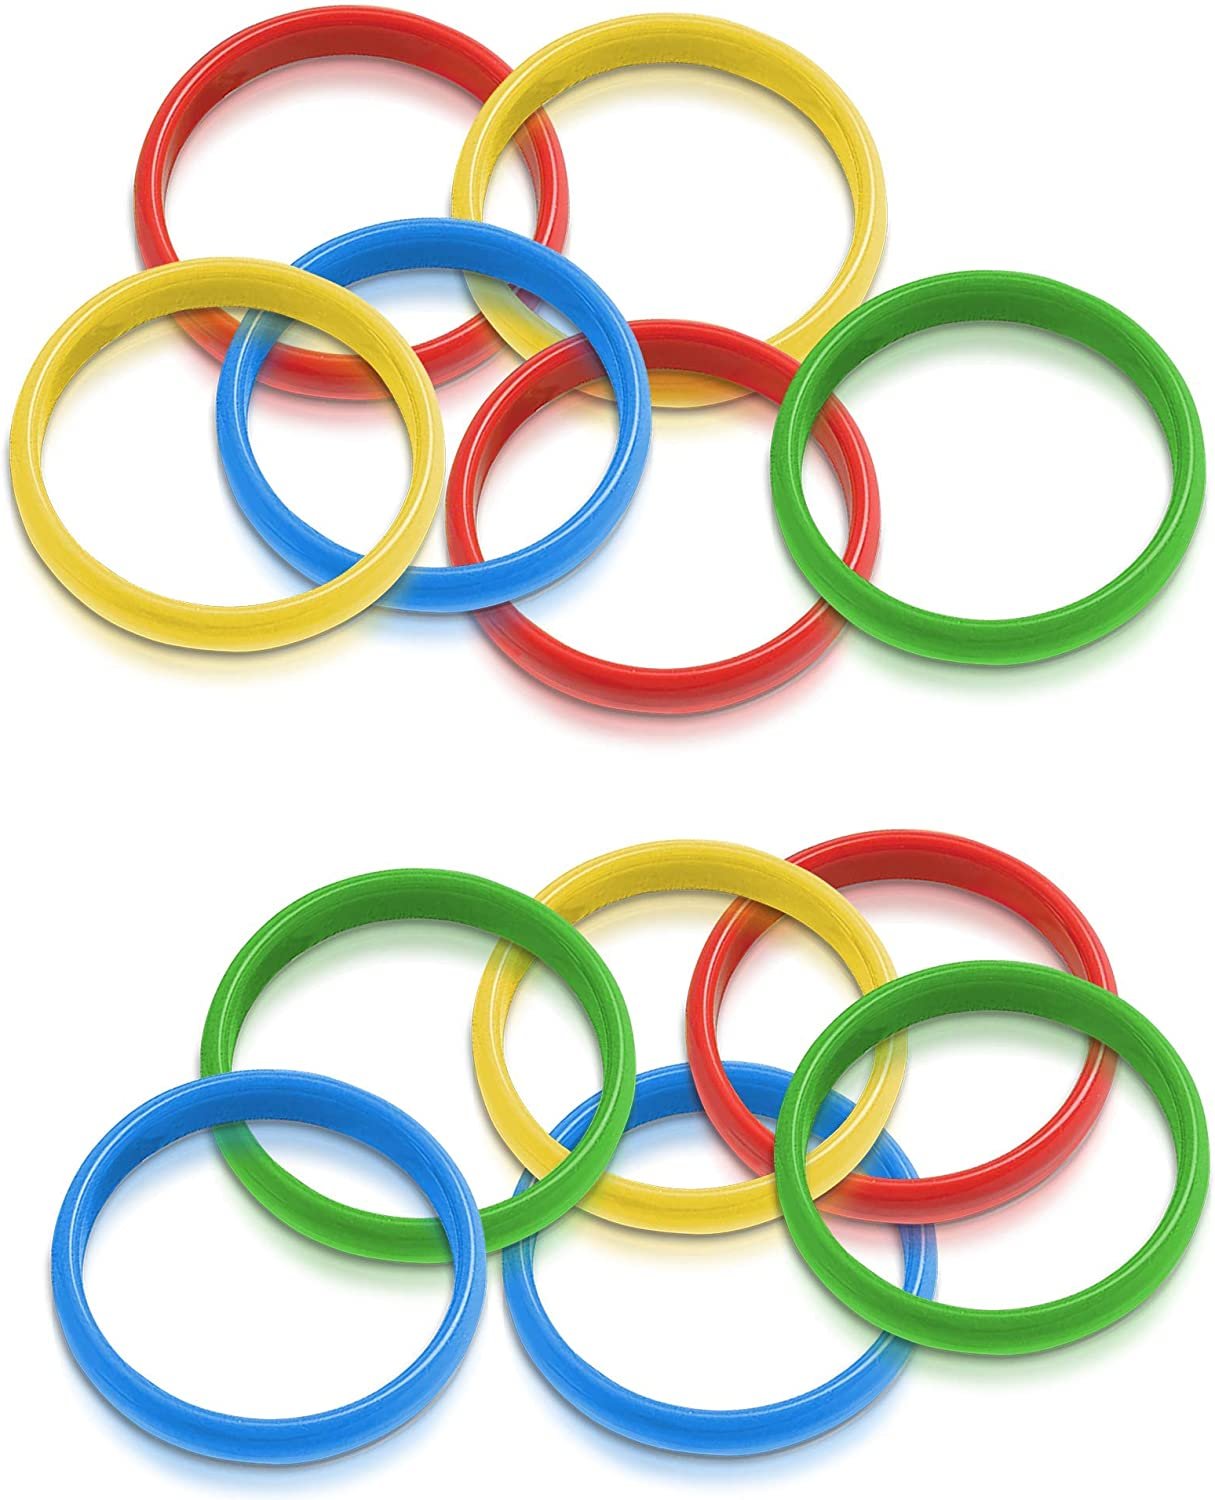 Gamie Carnival Cane Rack Rings - Set of 12 - Colored Hoops for Ring Toss Games and More - Durable Plastic - Carnival Supplies for Party Activities